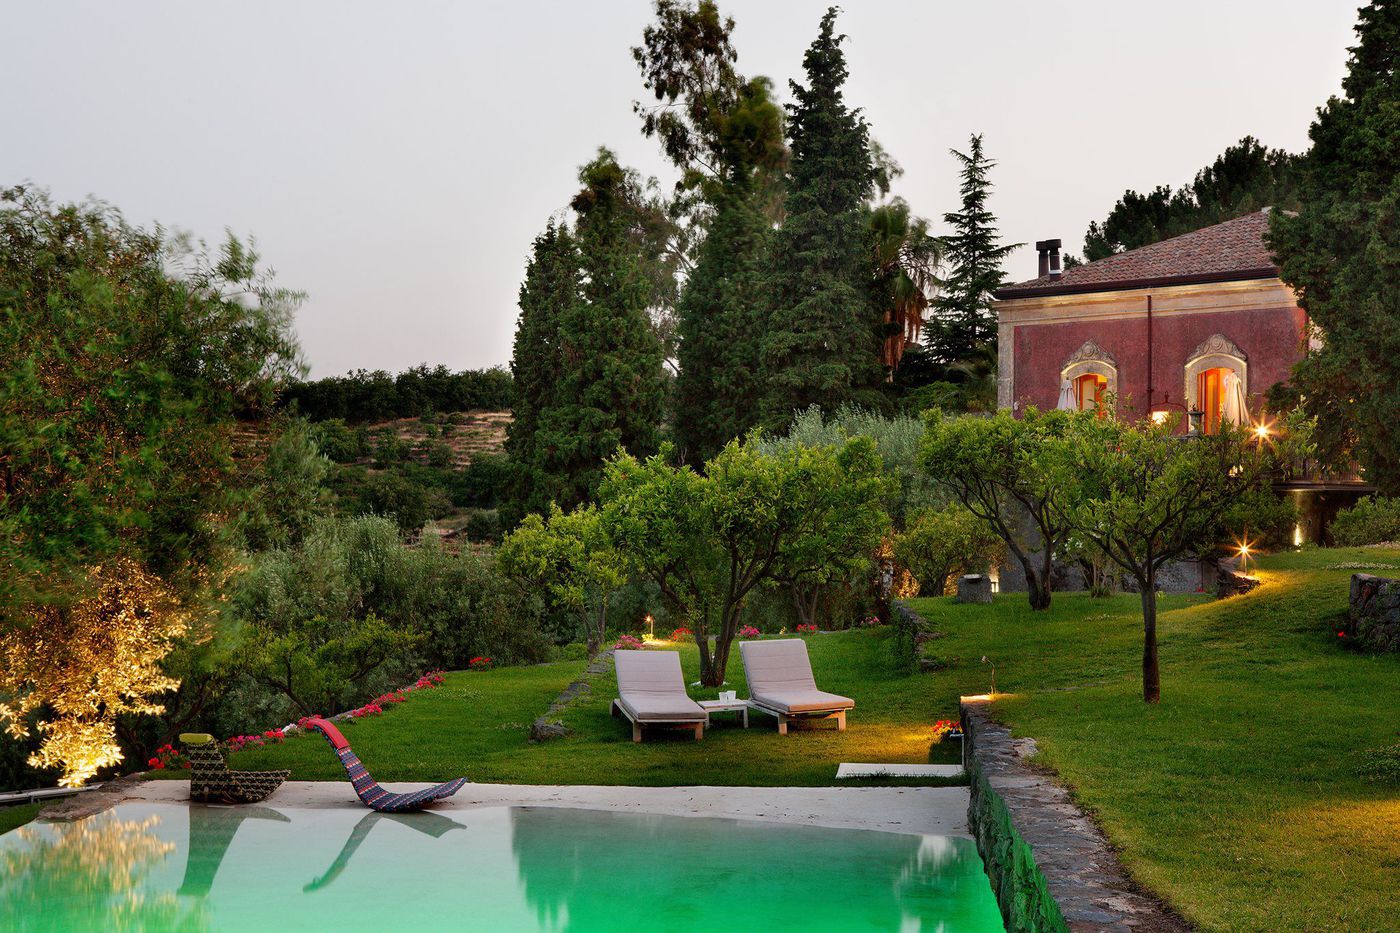 A photo of 3-Nights Exclusive Winerist Package at Monaci delle Terre Nere